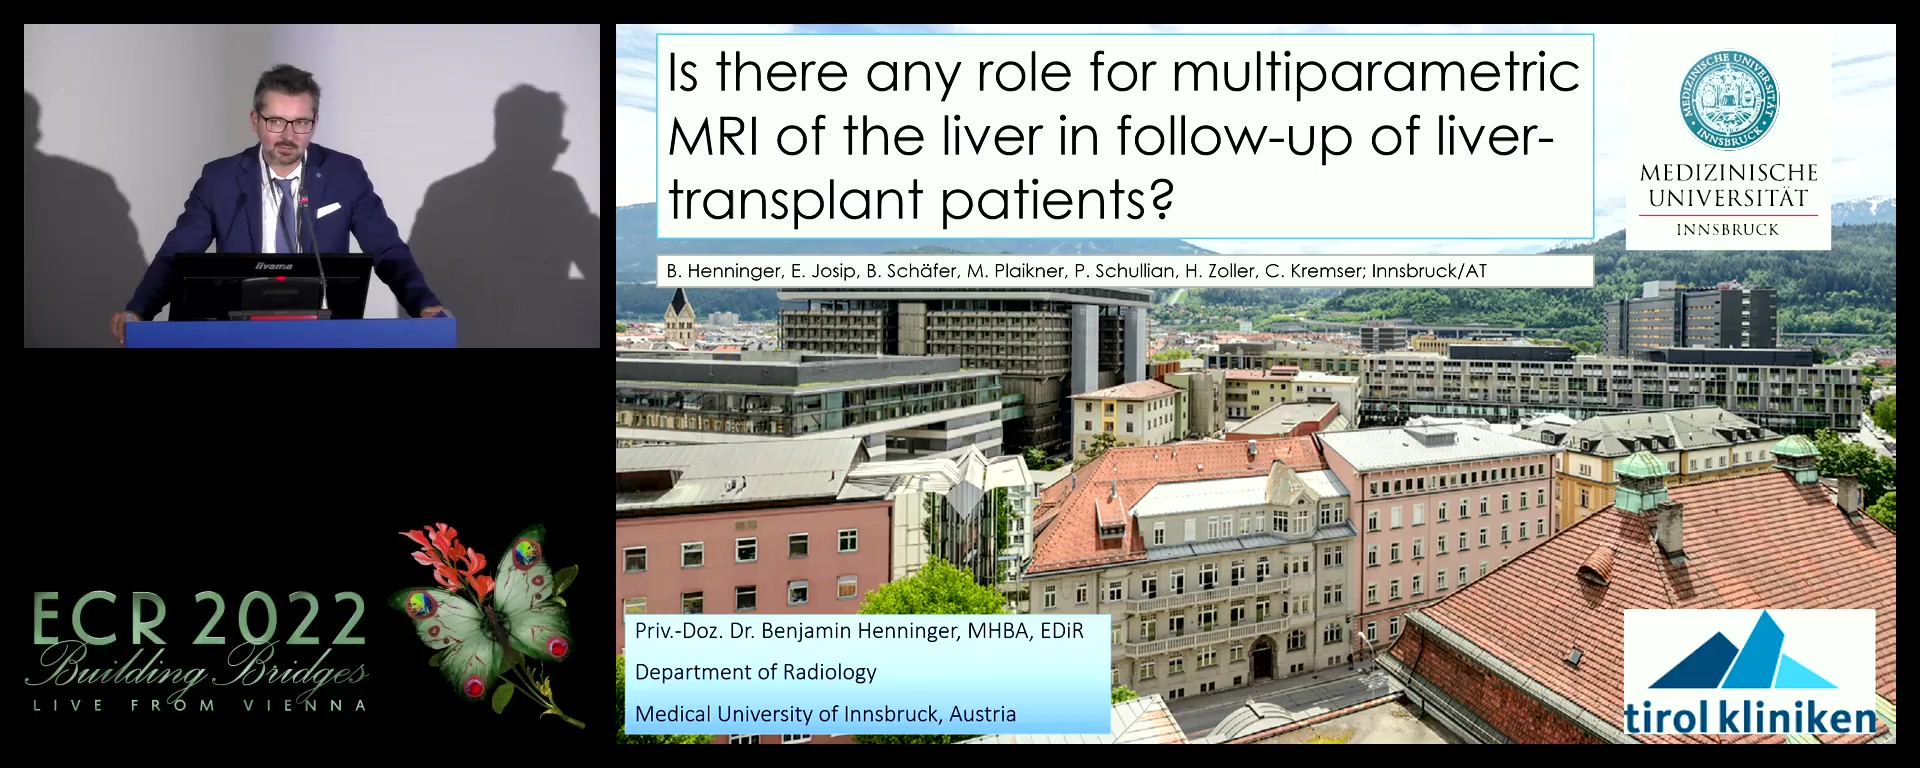 Is there any role for multiparametric MRI of the liver in follow-up of liver-transplant patients? - Benjamin Henninger, Innsbruck / AT